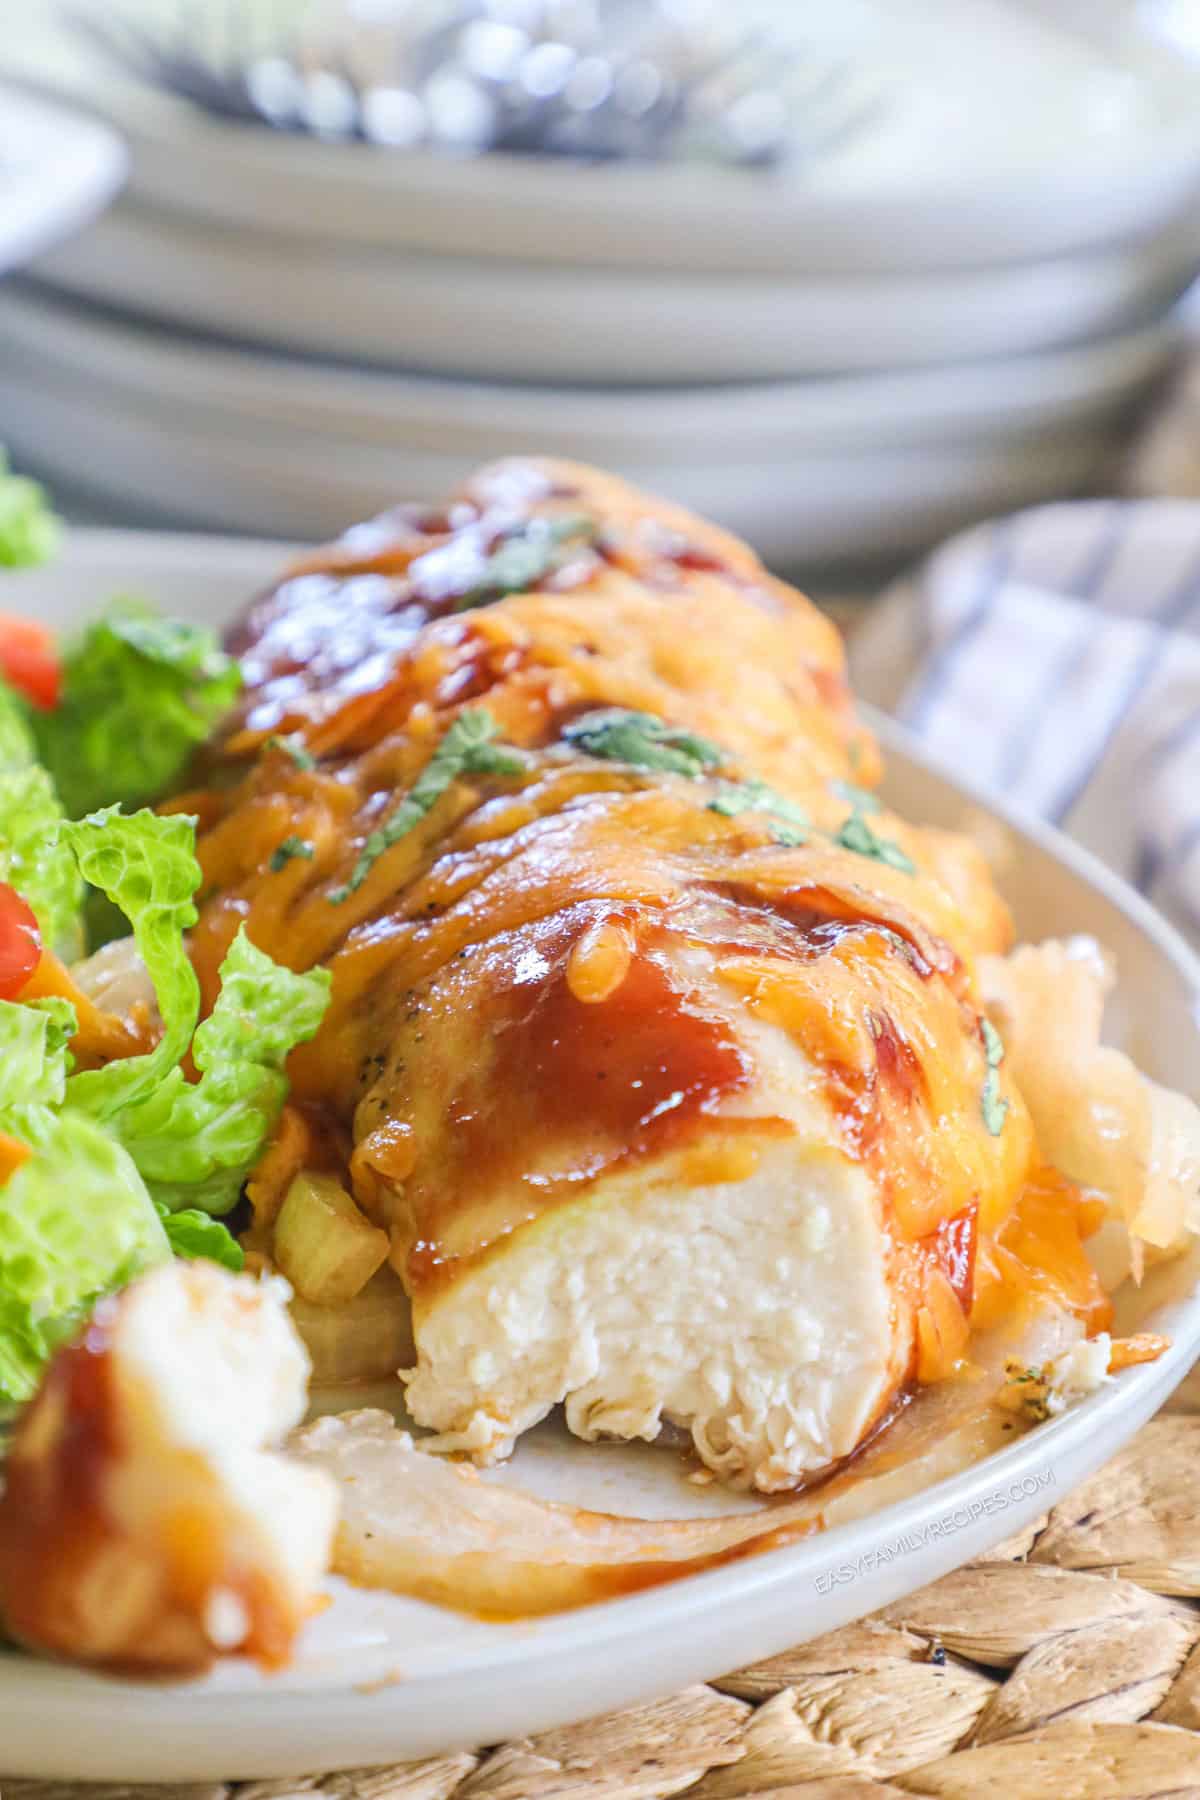 A plate with a baked BBQ chicken breast topped with melted cheese and sliced open.